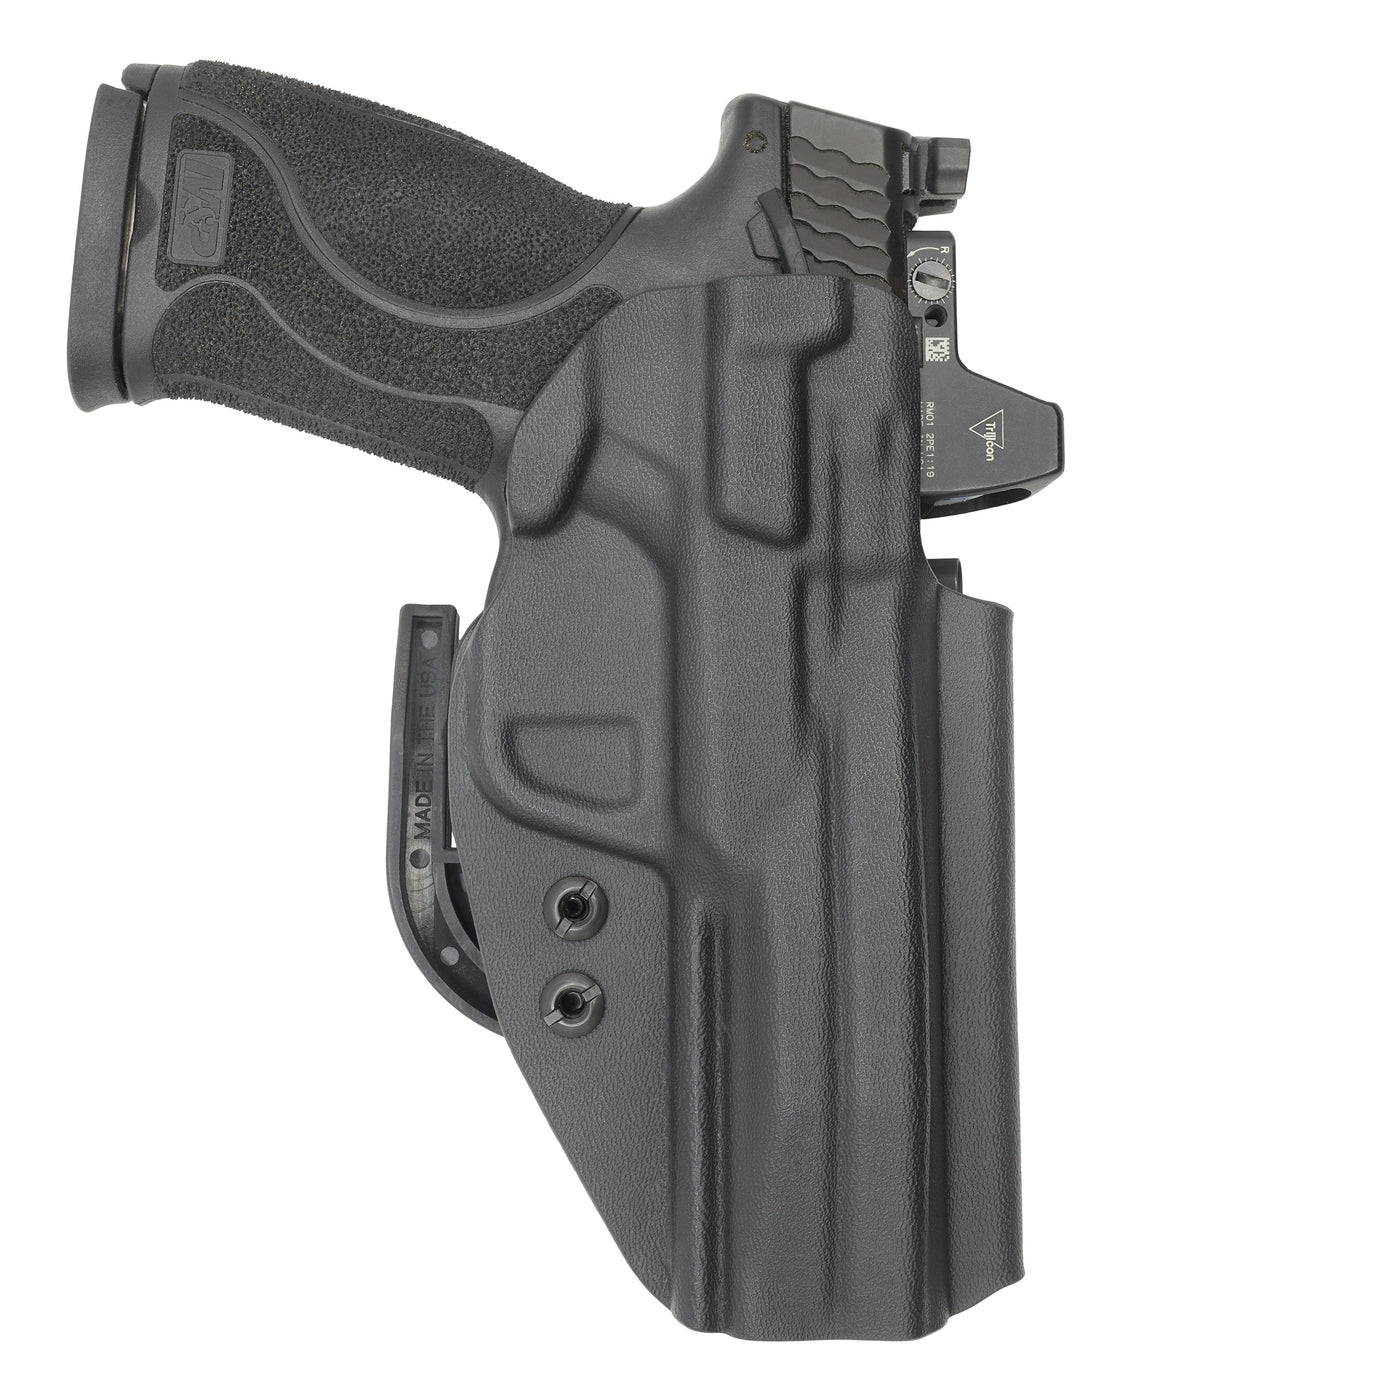 C&G Holsters quickship IWB ALPHA UPGRADE Covert M&P 10/45 4.6" LEFT HAND in holstered position back view